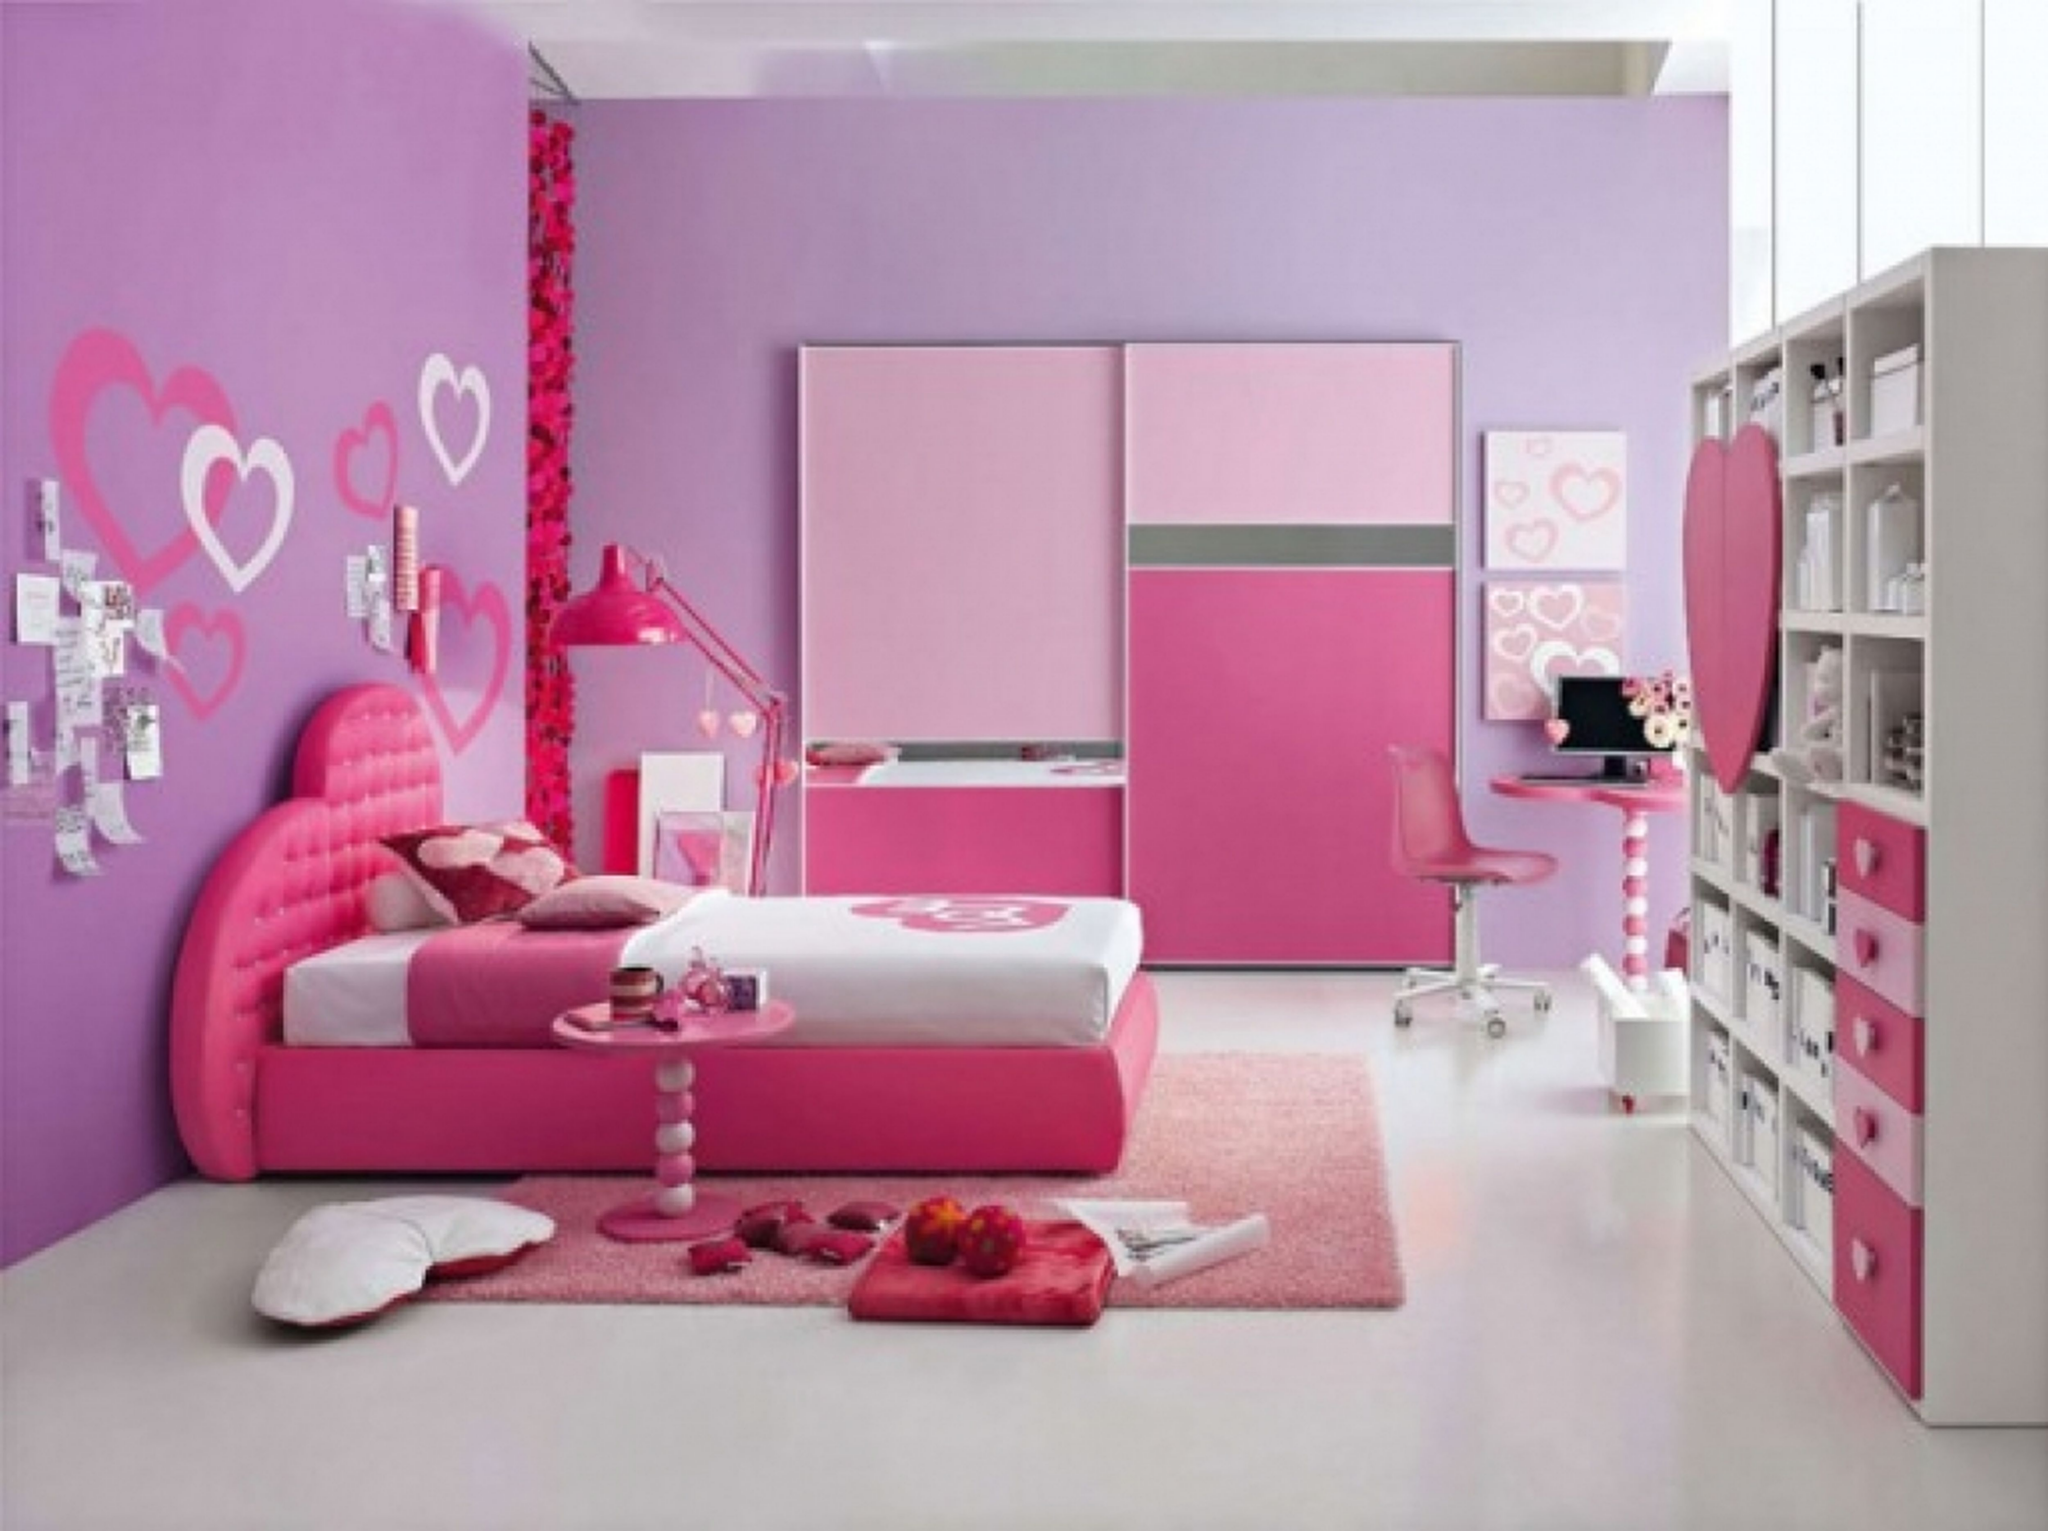 Bold and cute colorful room suggestions for girl kids sweet arrangement excelkent furnish for a cute bedroom